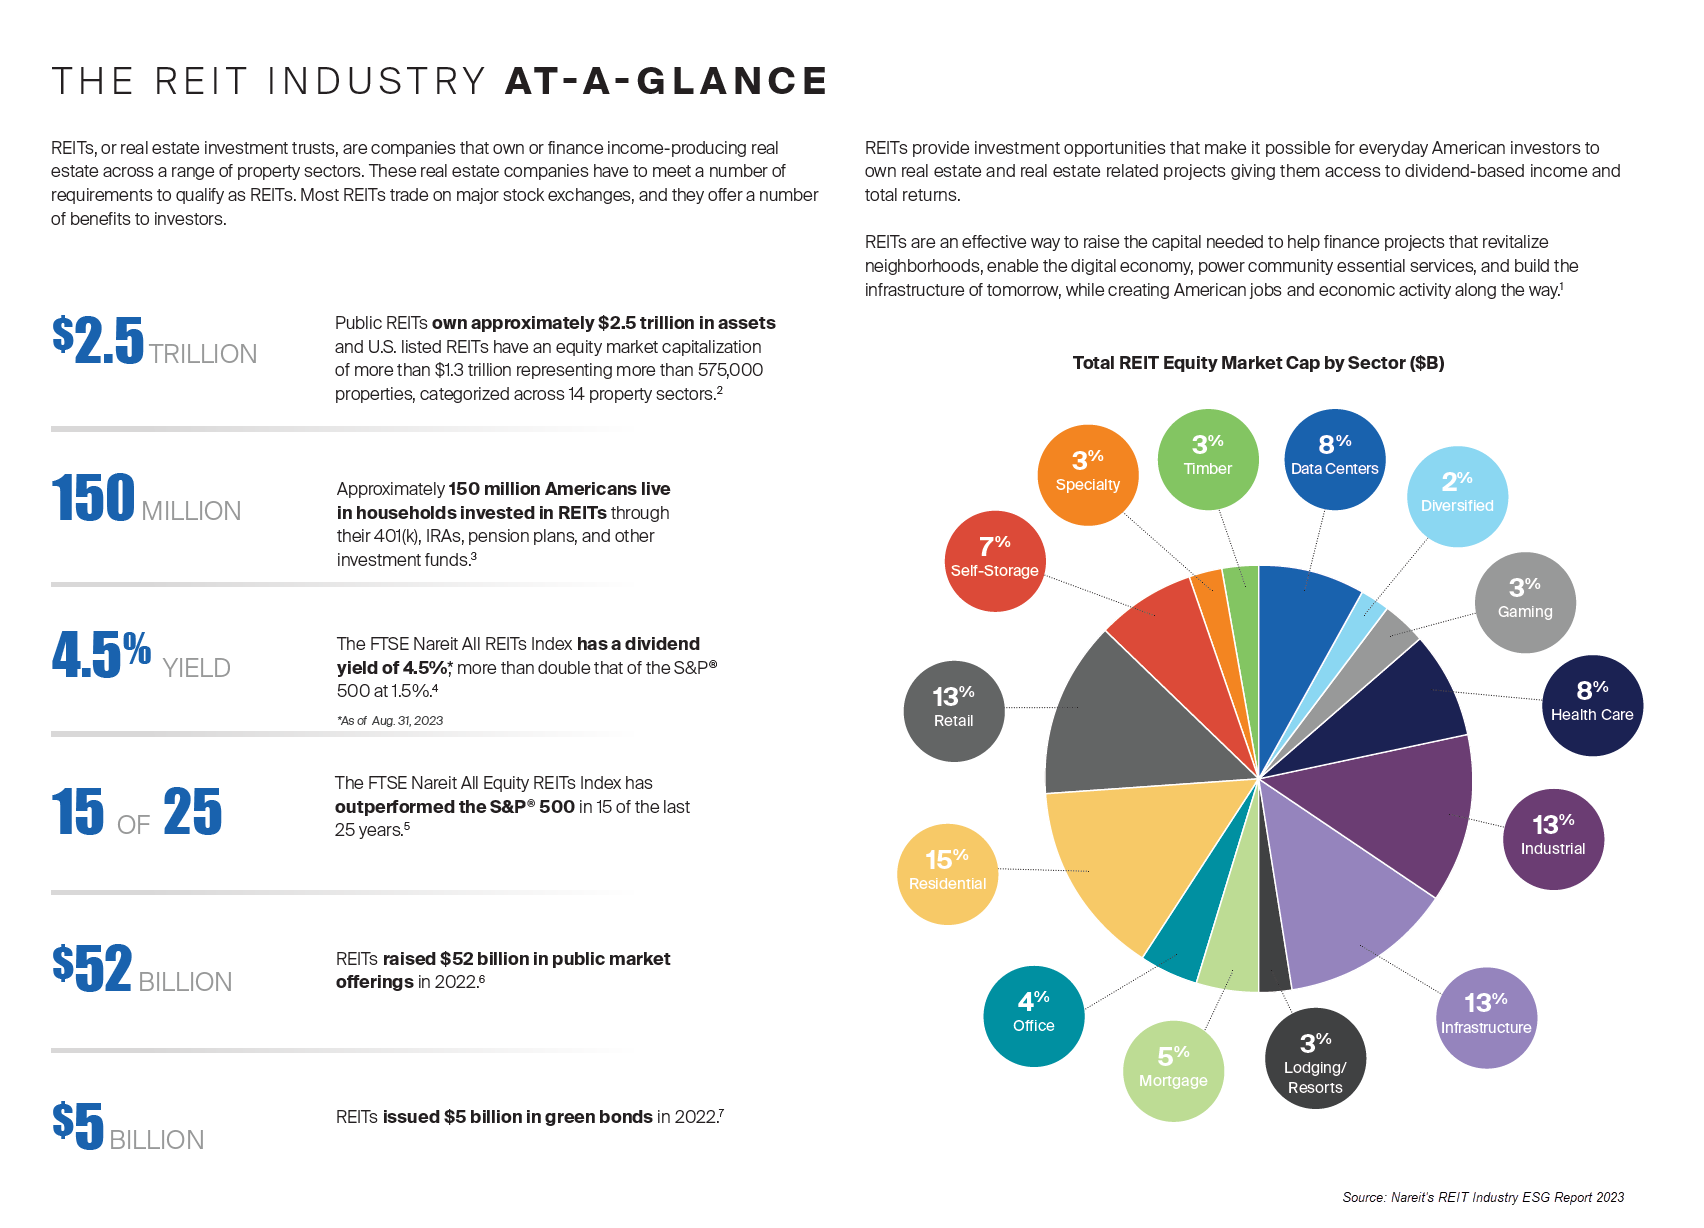 REIT Industry at a Glance Image 